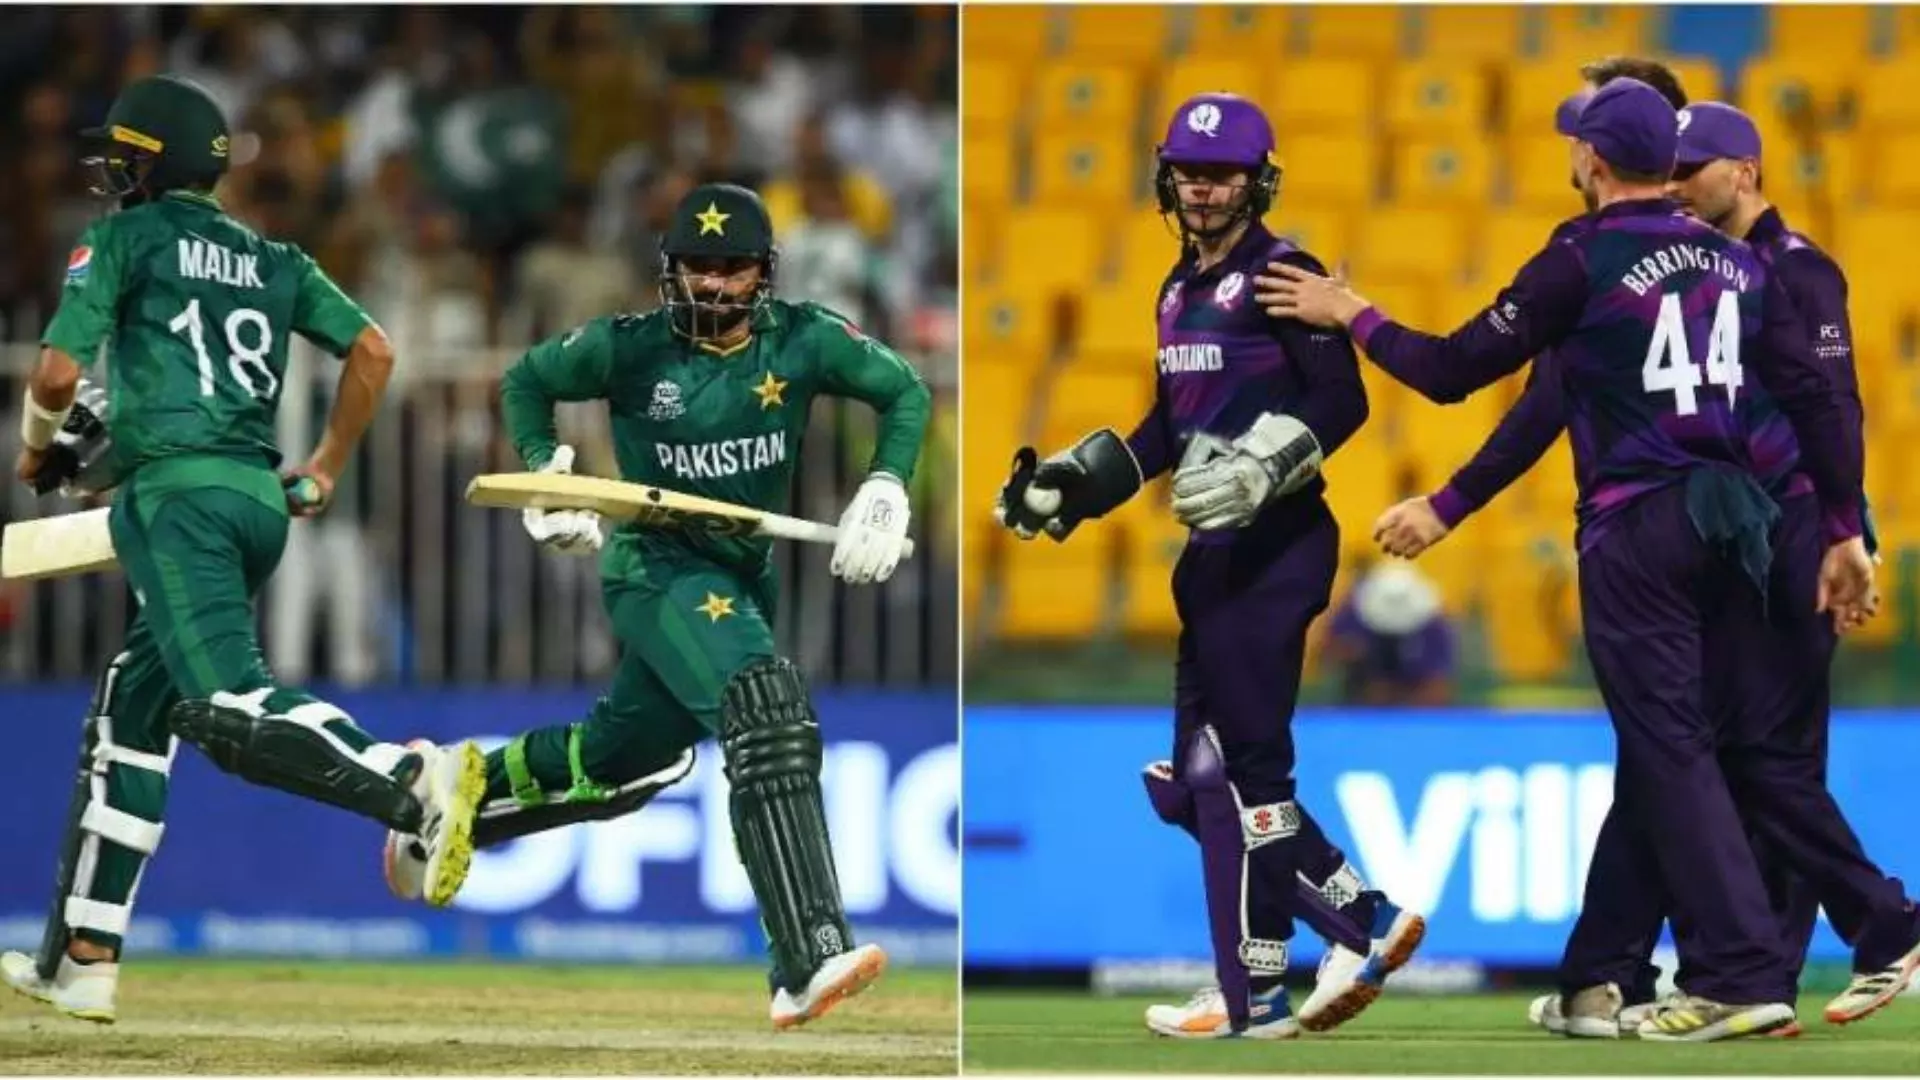 T20 World Cup 2021 Pakistan Vs Scotland Match Preview Today 07th November 2021 - Cricket News